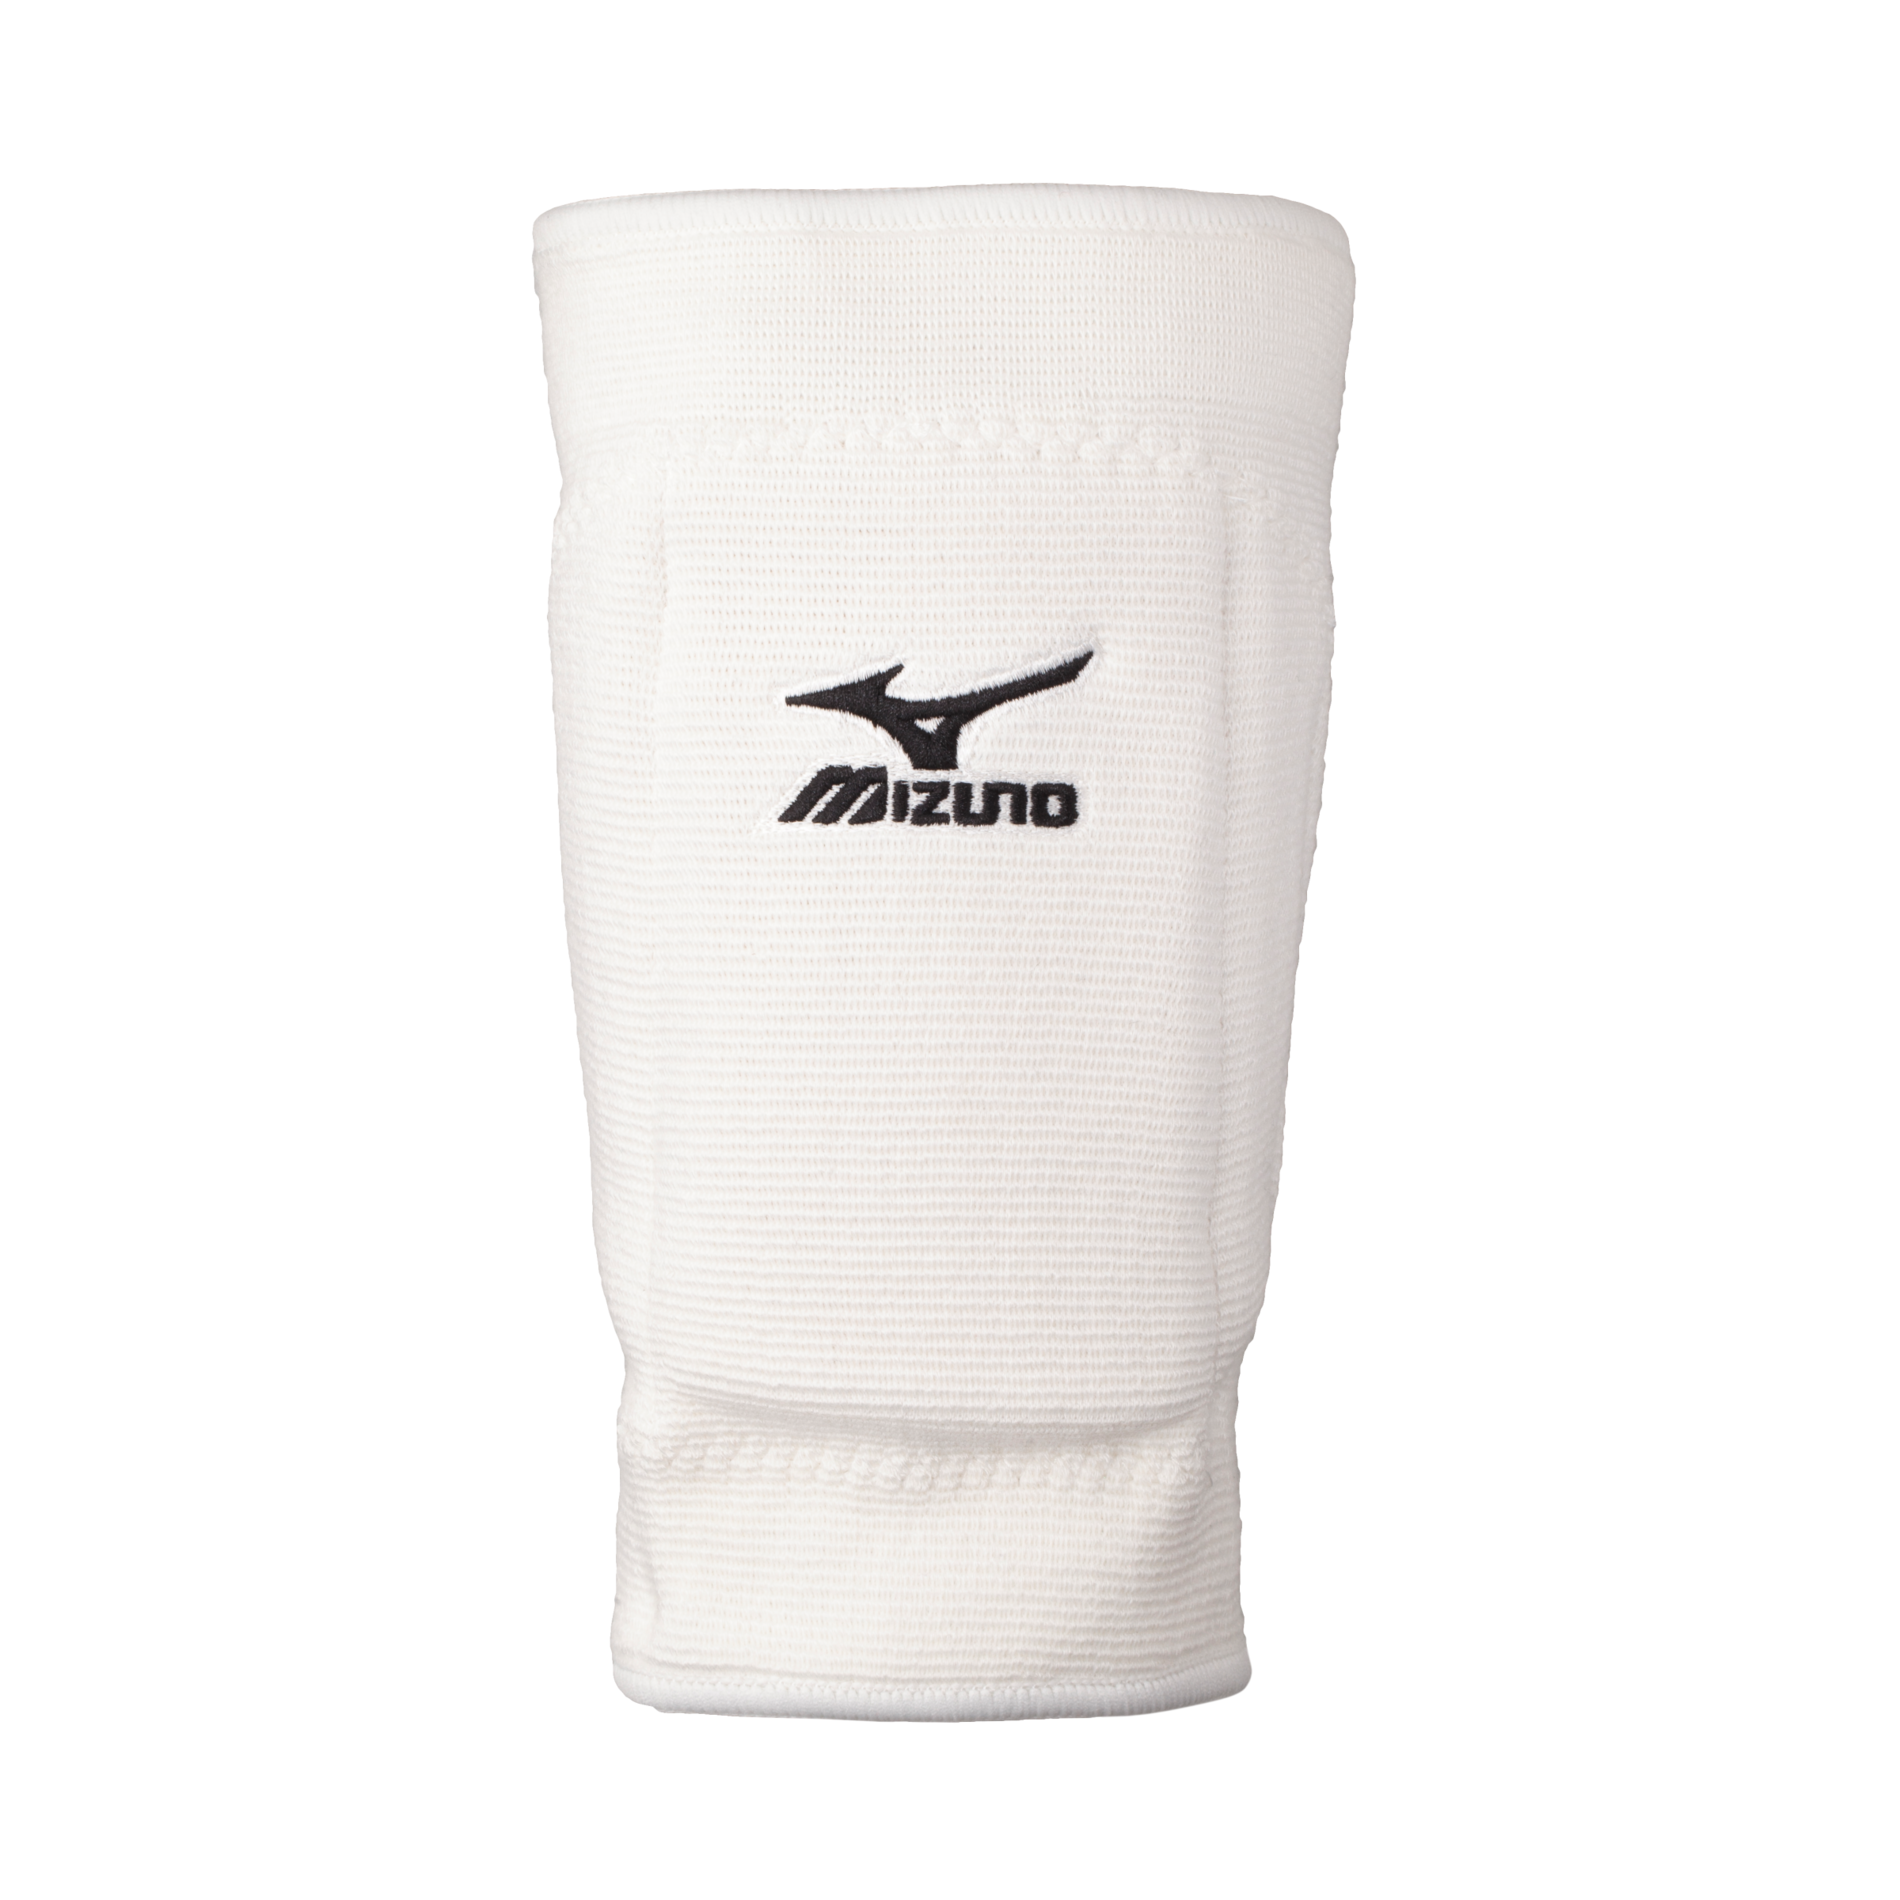 Mizuno Volleyball Knee Supporter Super Long Pad V2MY8020 Japan